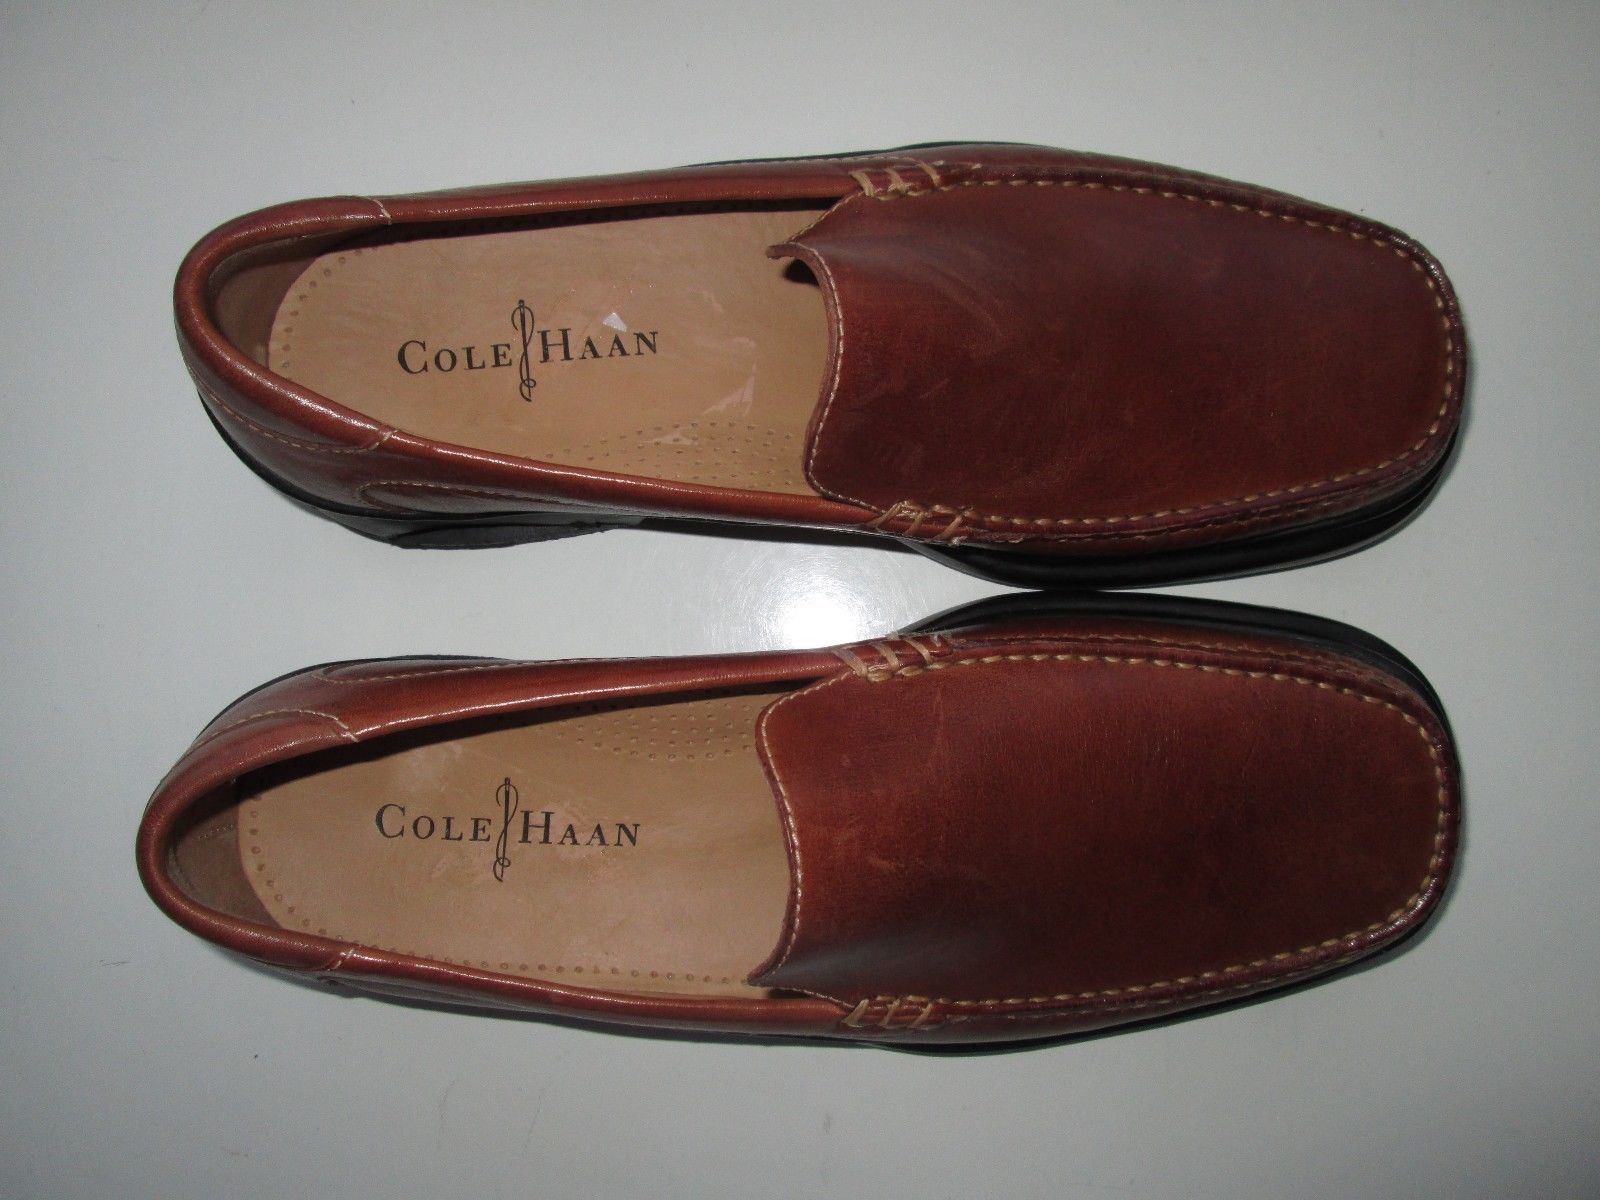 Cole Haan NIKE AIR Full Grain Leather Slip-On Loafer Men’s Shoes Cognac ...